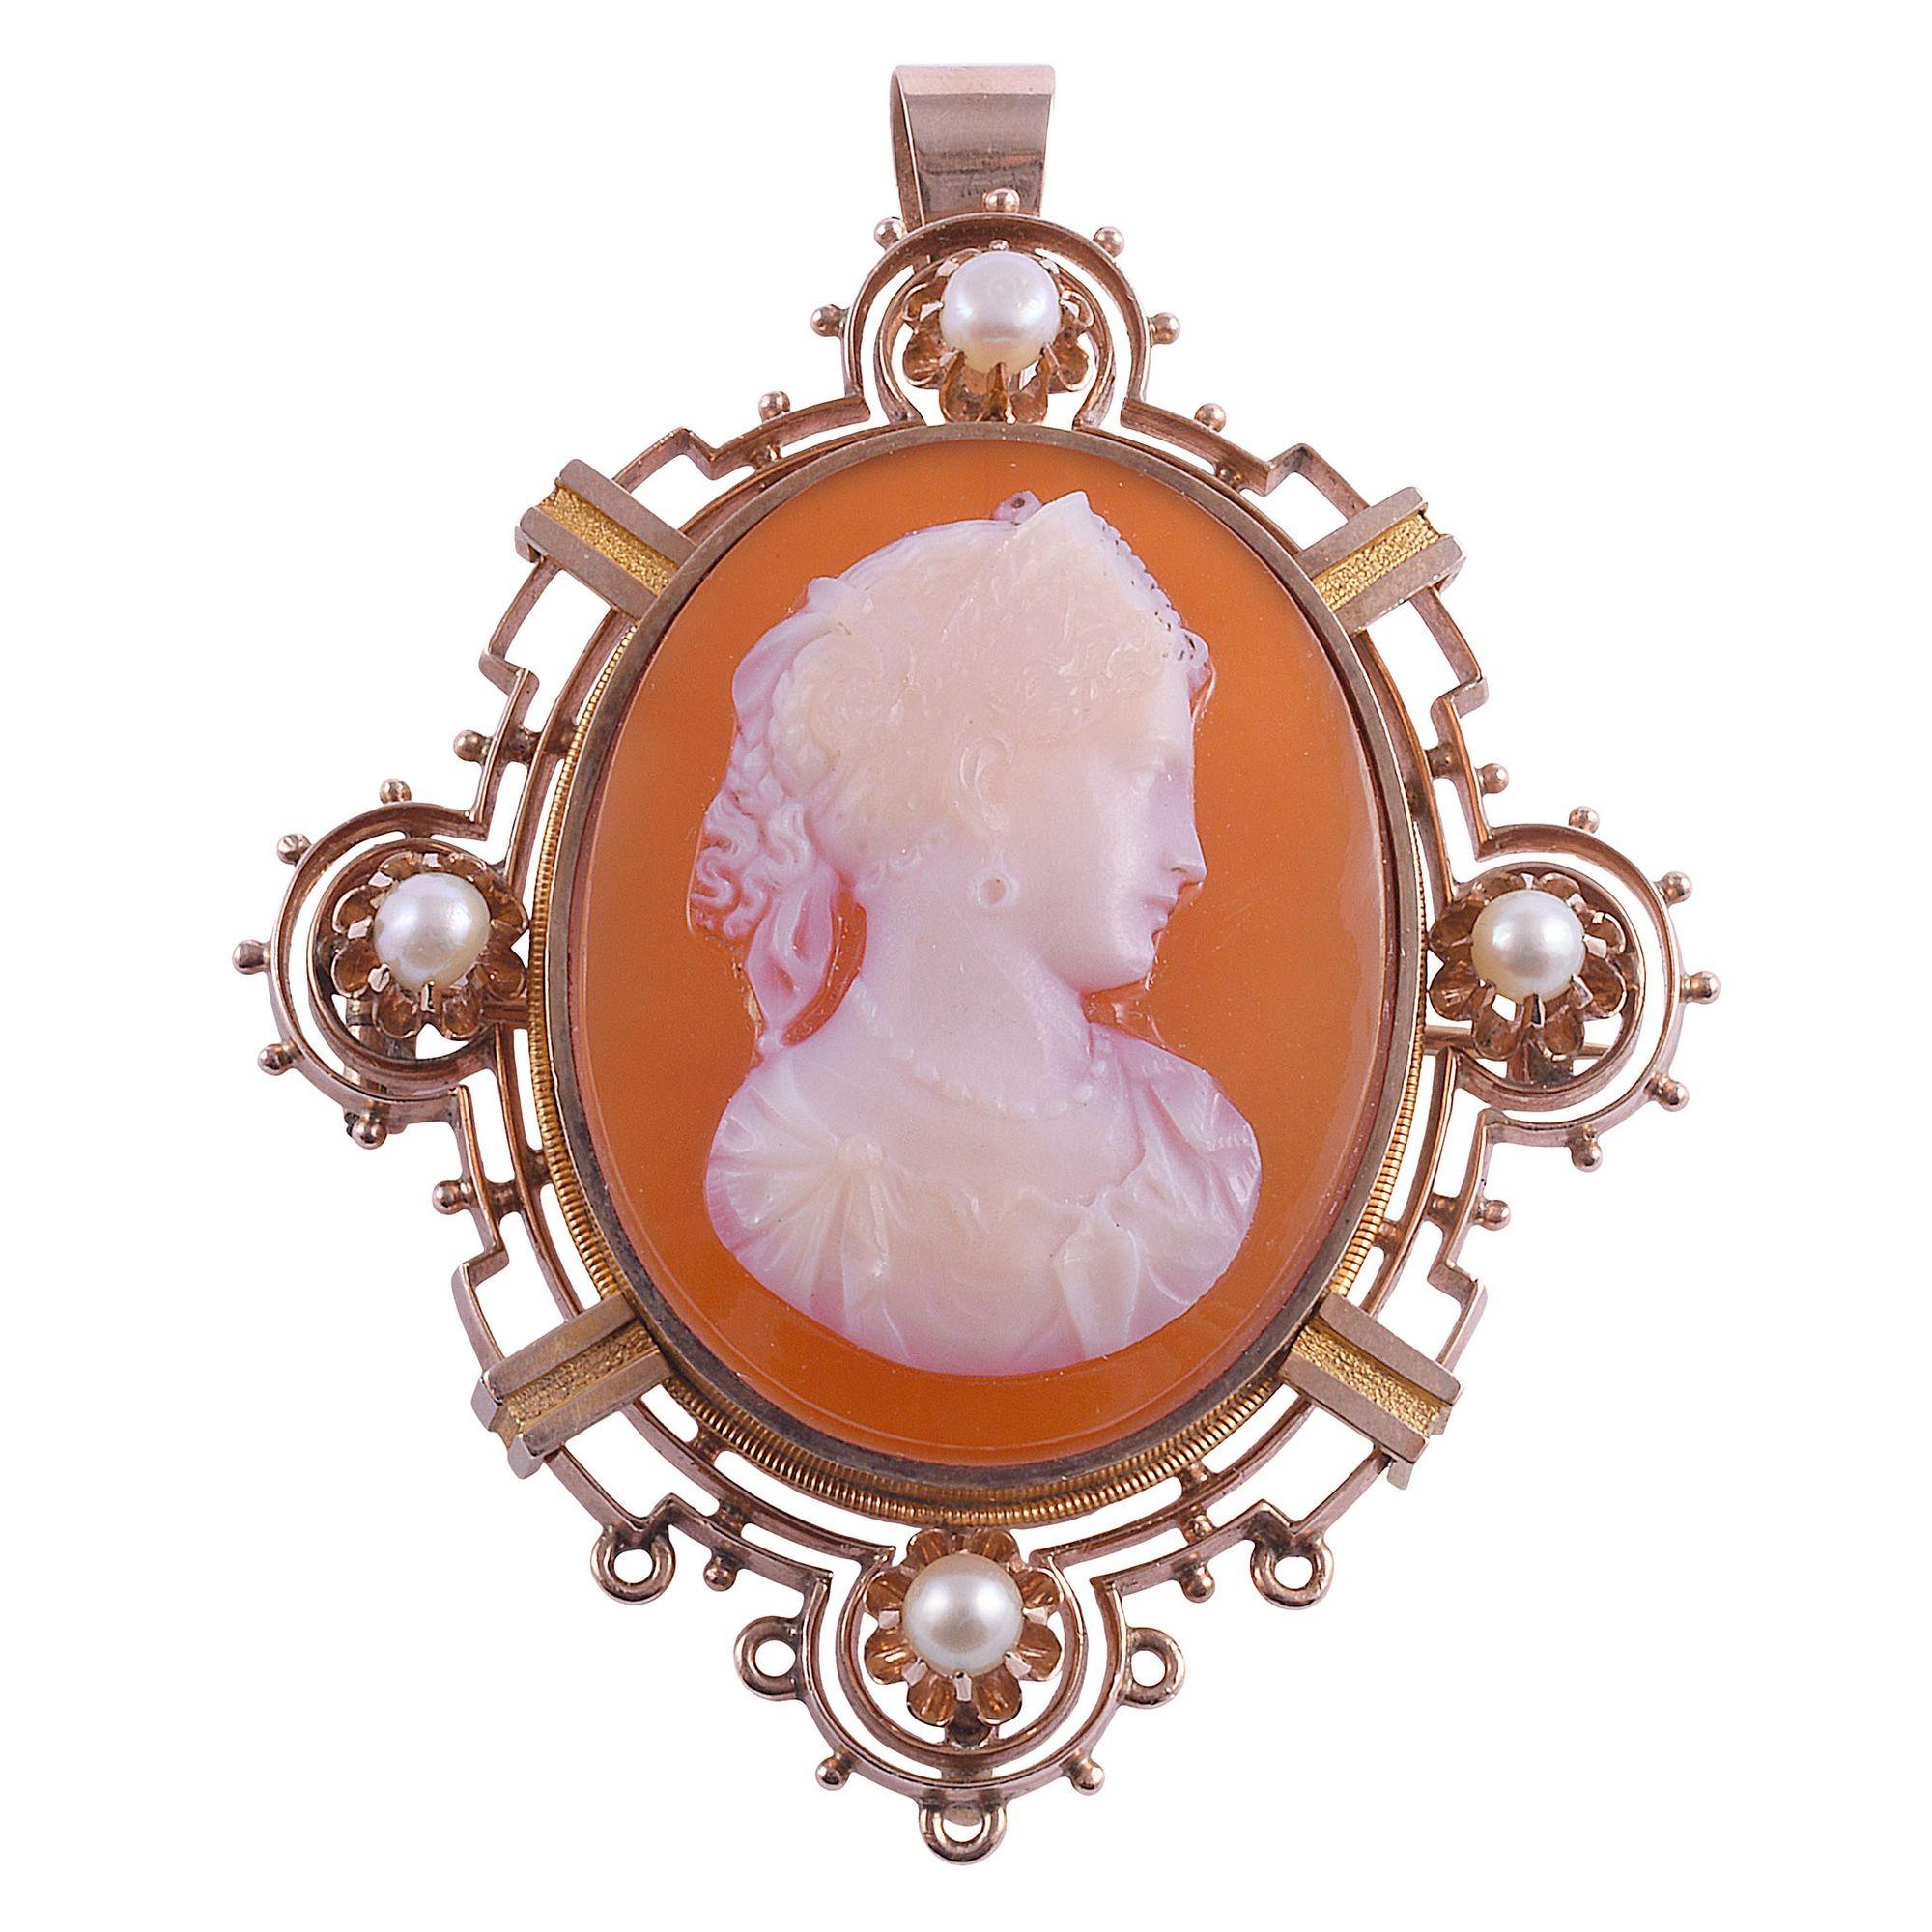 Antique Victorian carnelian & agate cameo pin or pendant, circa 1880. This antique cameo is very finely carved in agate and carnelian. The hardstone cameo is set in a 14 karat yellow gold frame with a pin back and a fold down bail. This Victorian